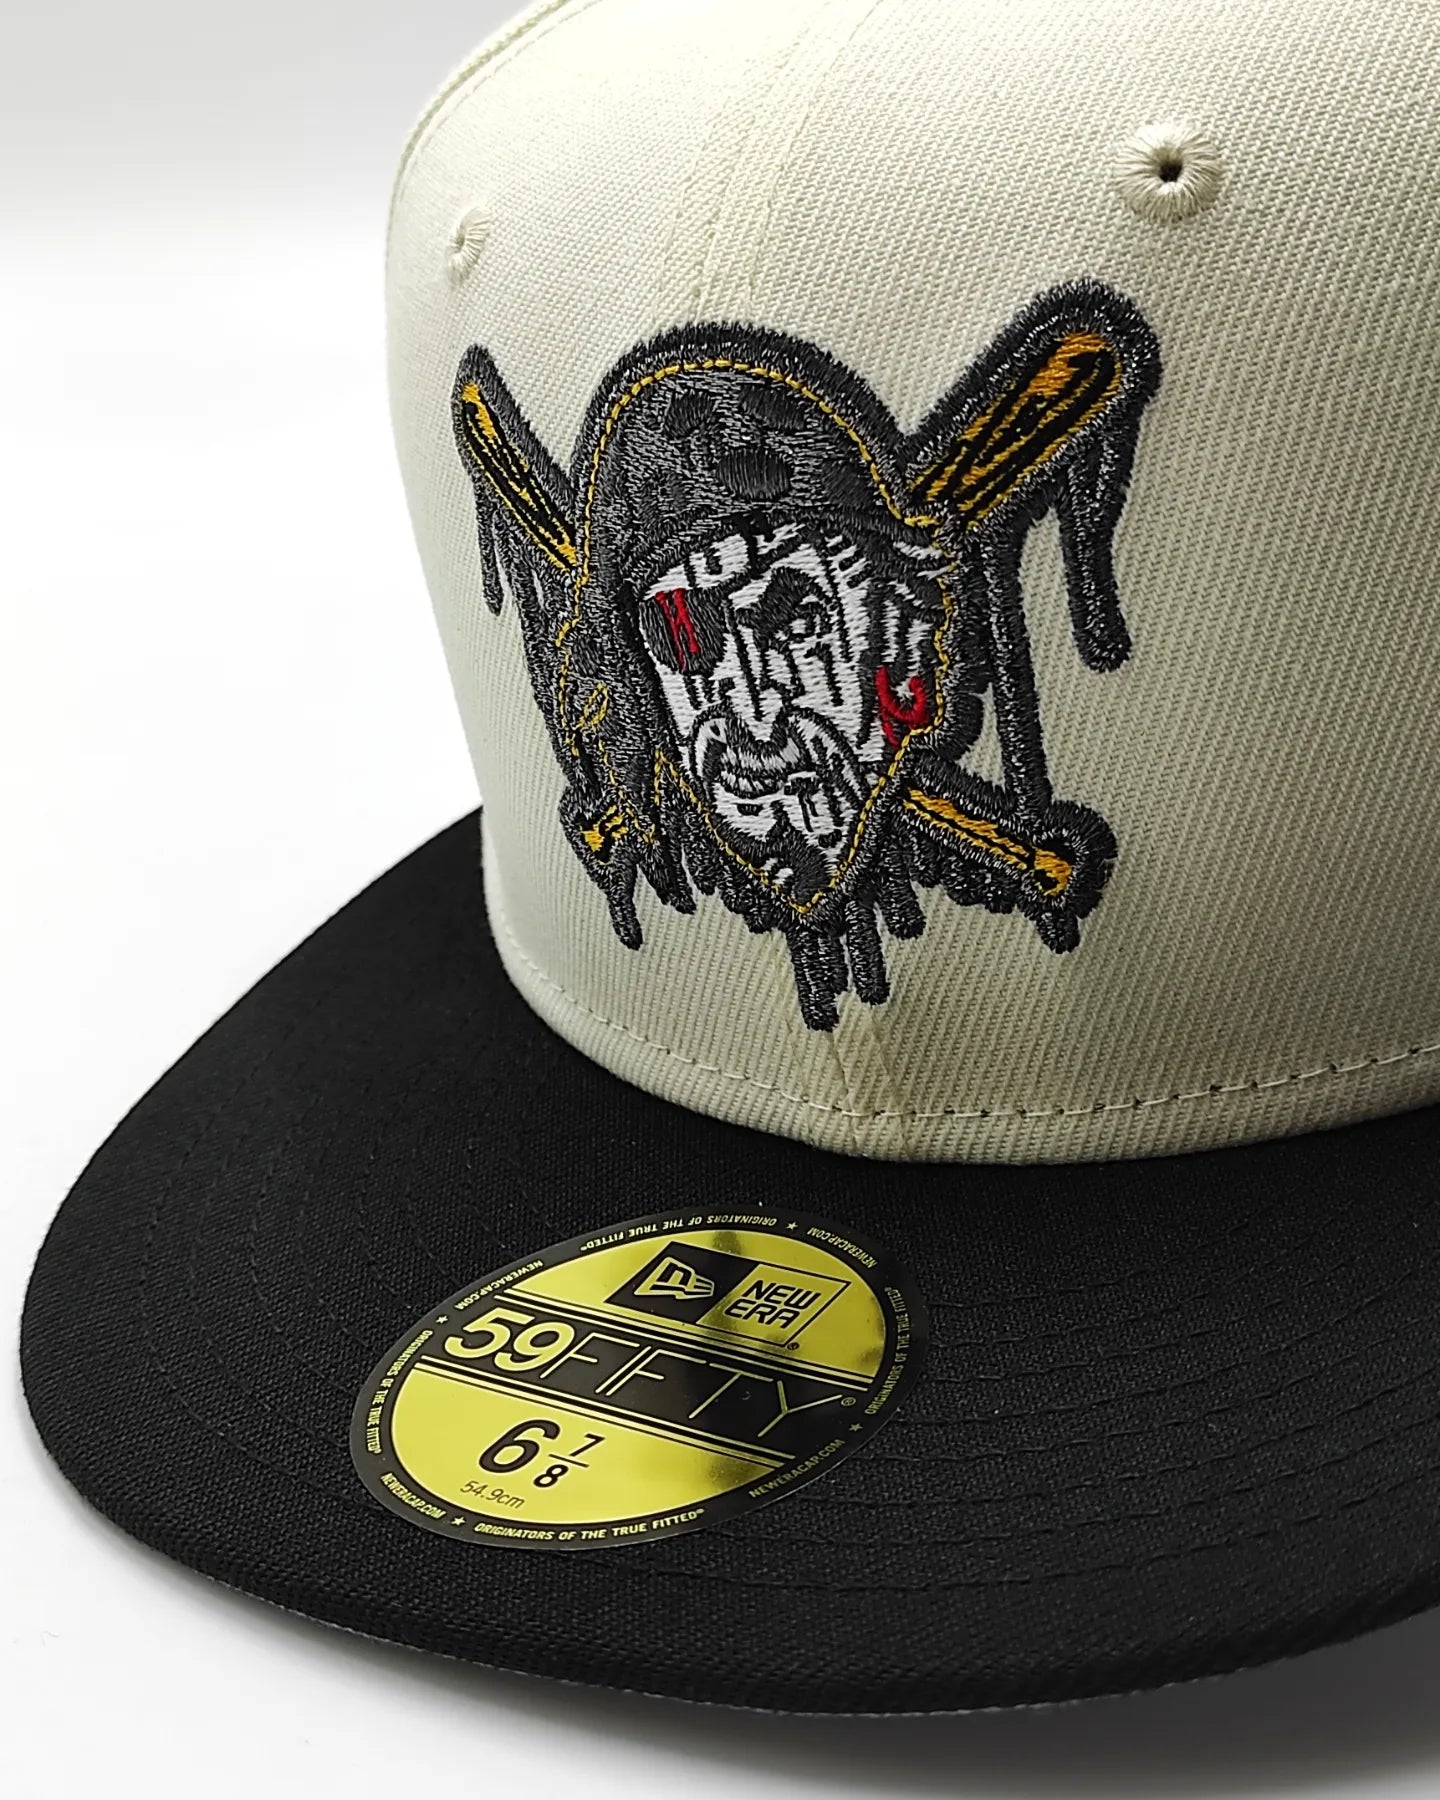 Off White Pittsburgh Pirates Black Visor Gray Bottom Three Rivers Stadium Side Patch New Era 59Fifty Fitted